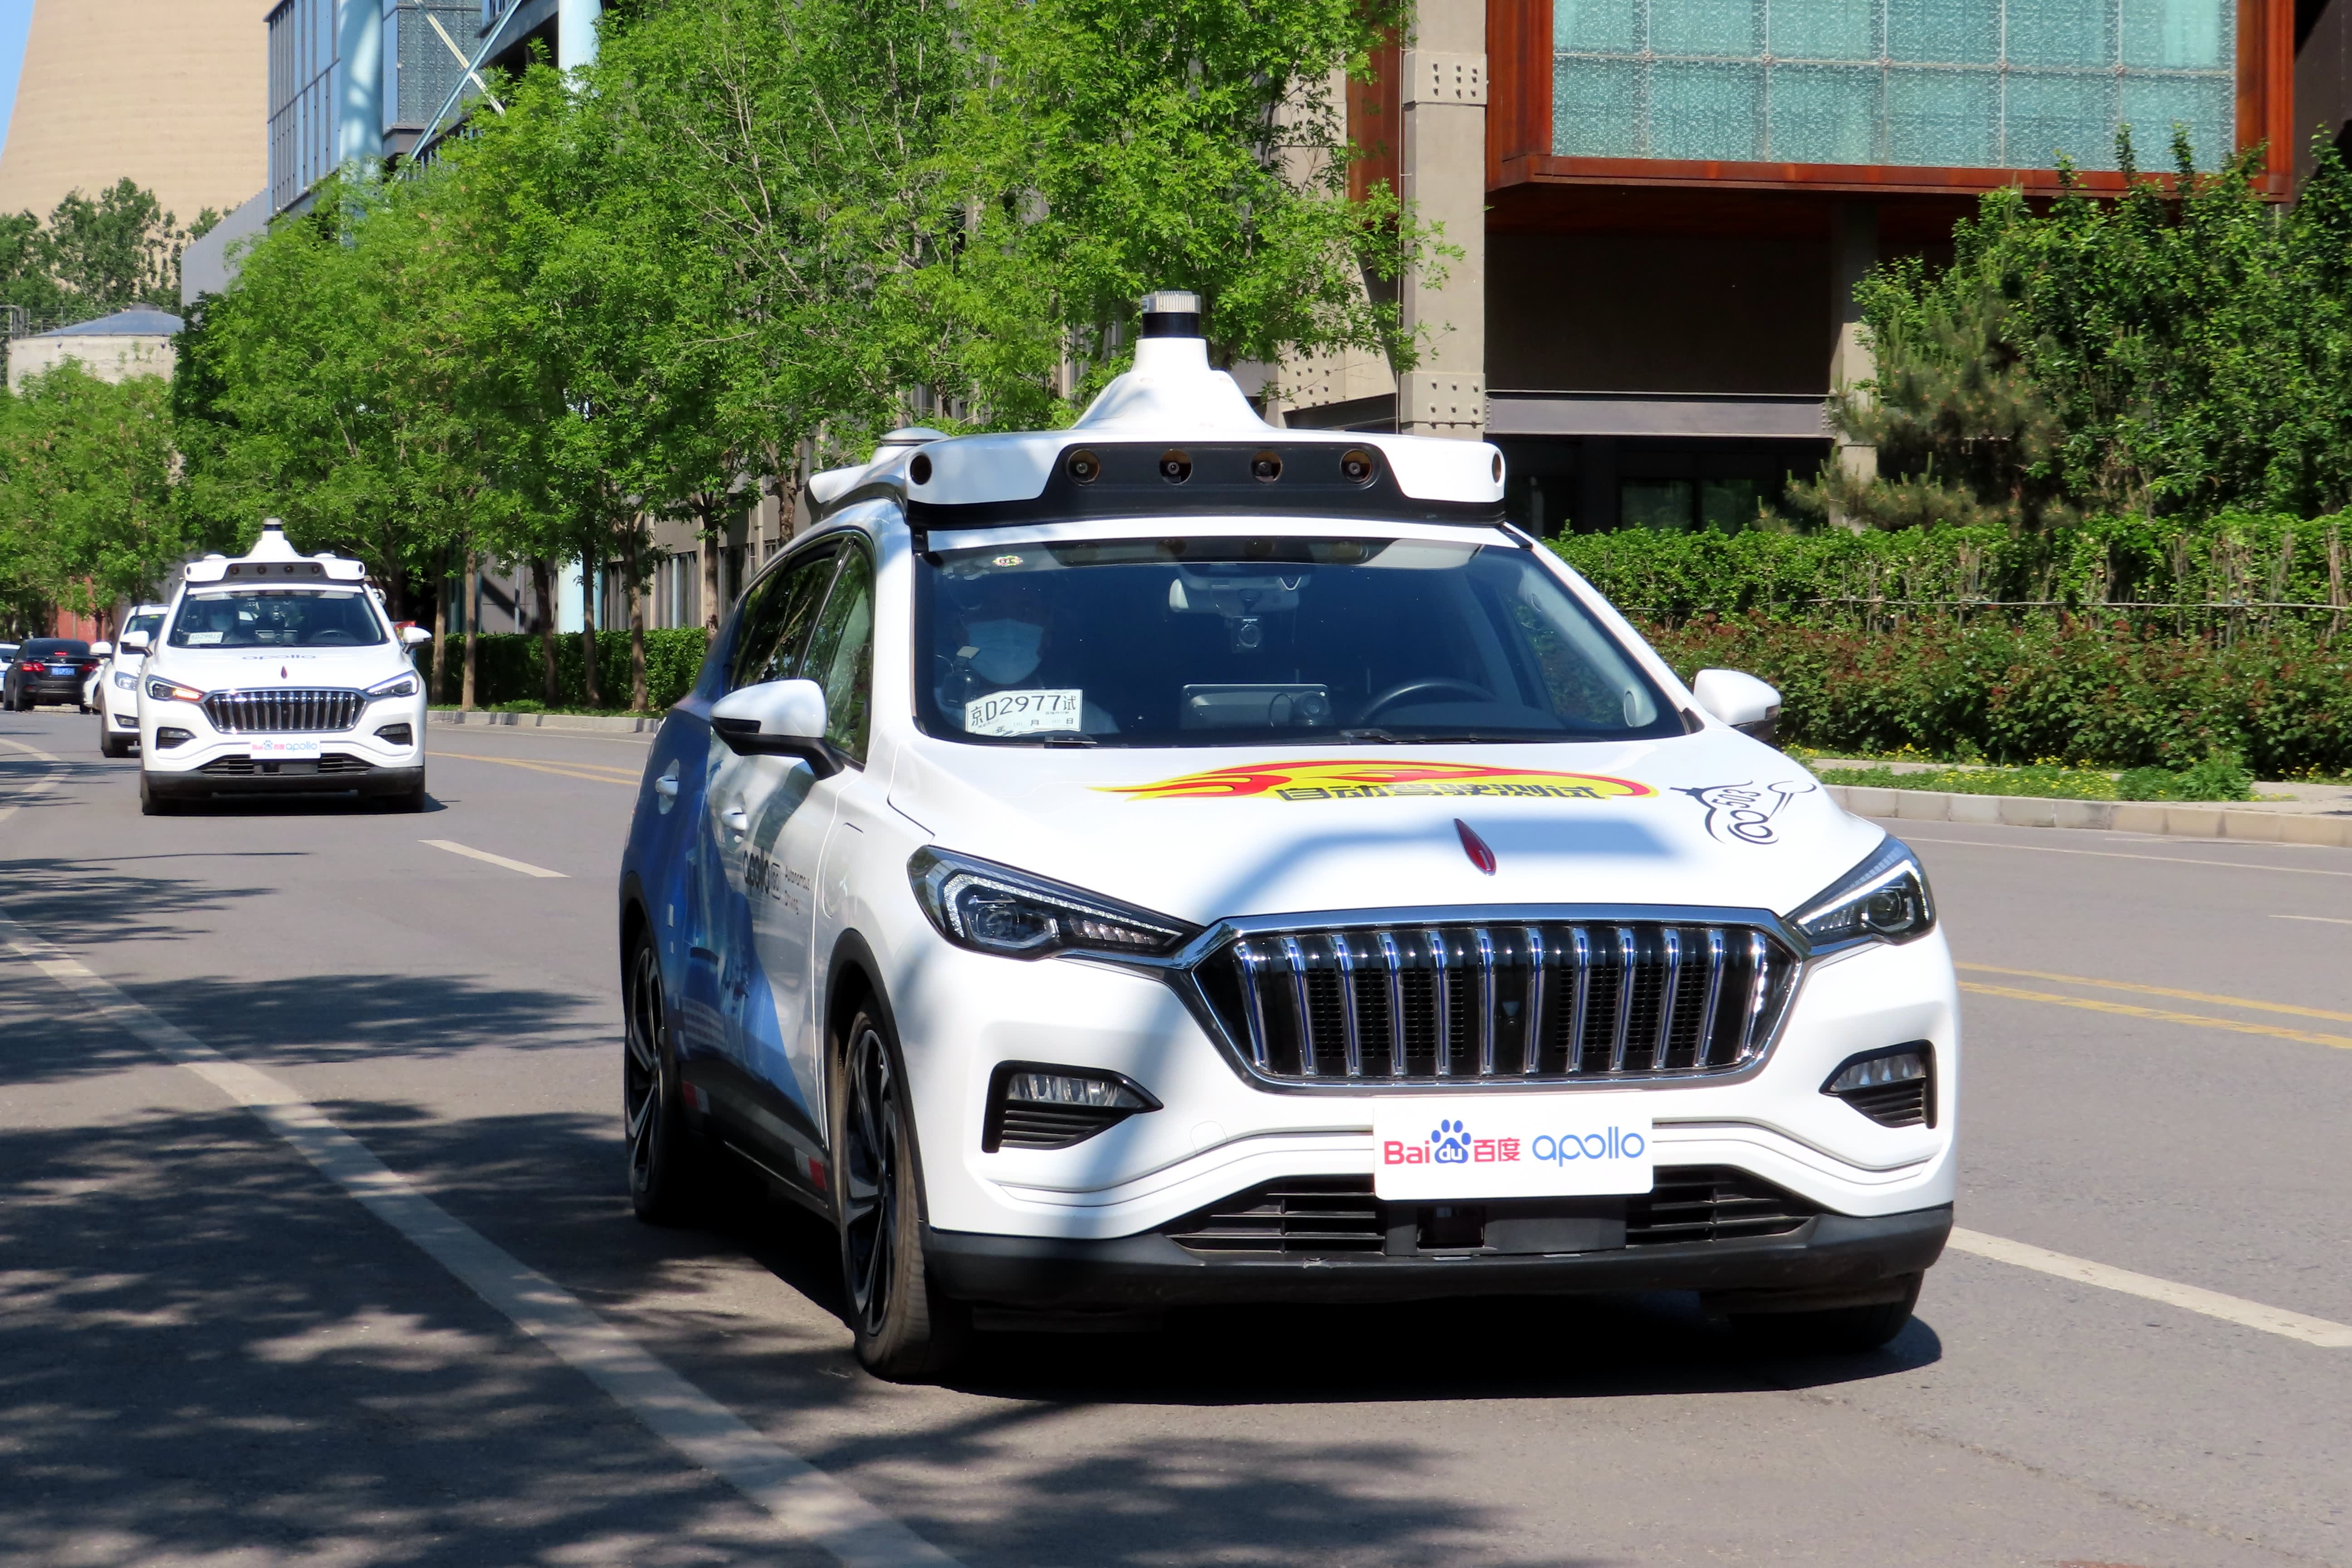 Uber's First Self-Driving Fleet Arrives in Pittsburgh This Month